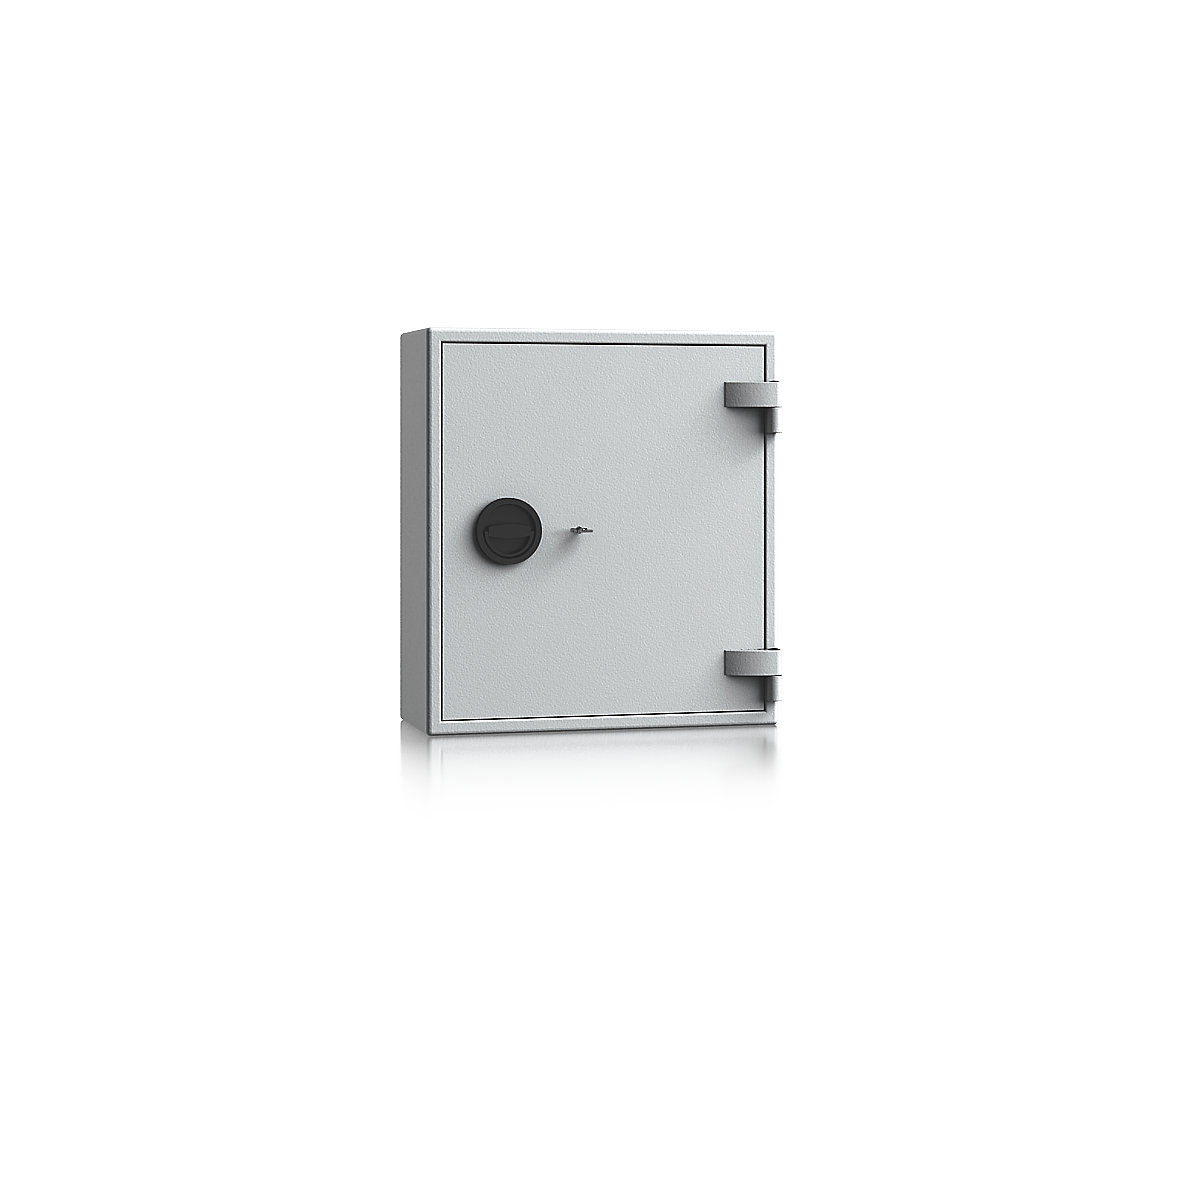 Key safe, security level A and Euro standard S1, light grey, HxWxD 550 x 500 x 200 mm, for up to 150 hooks-11